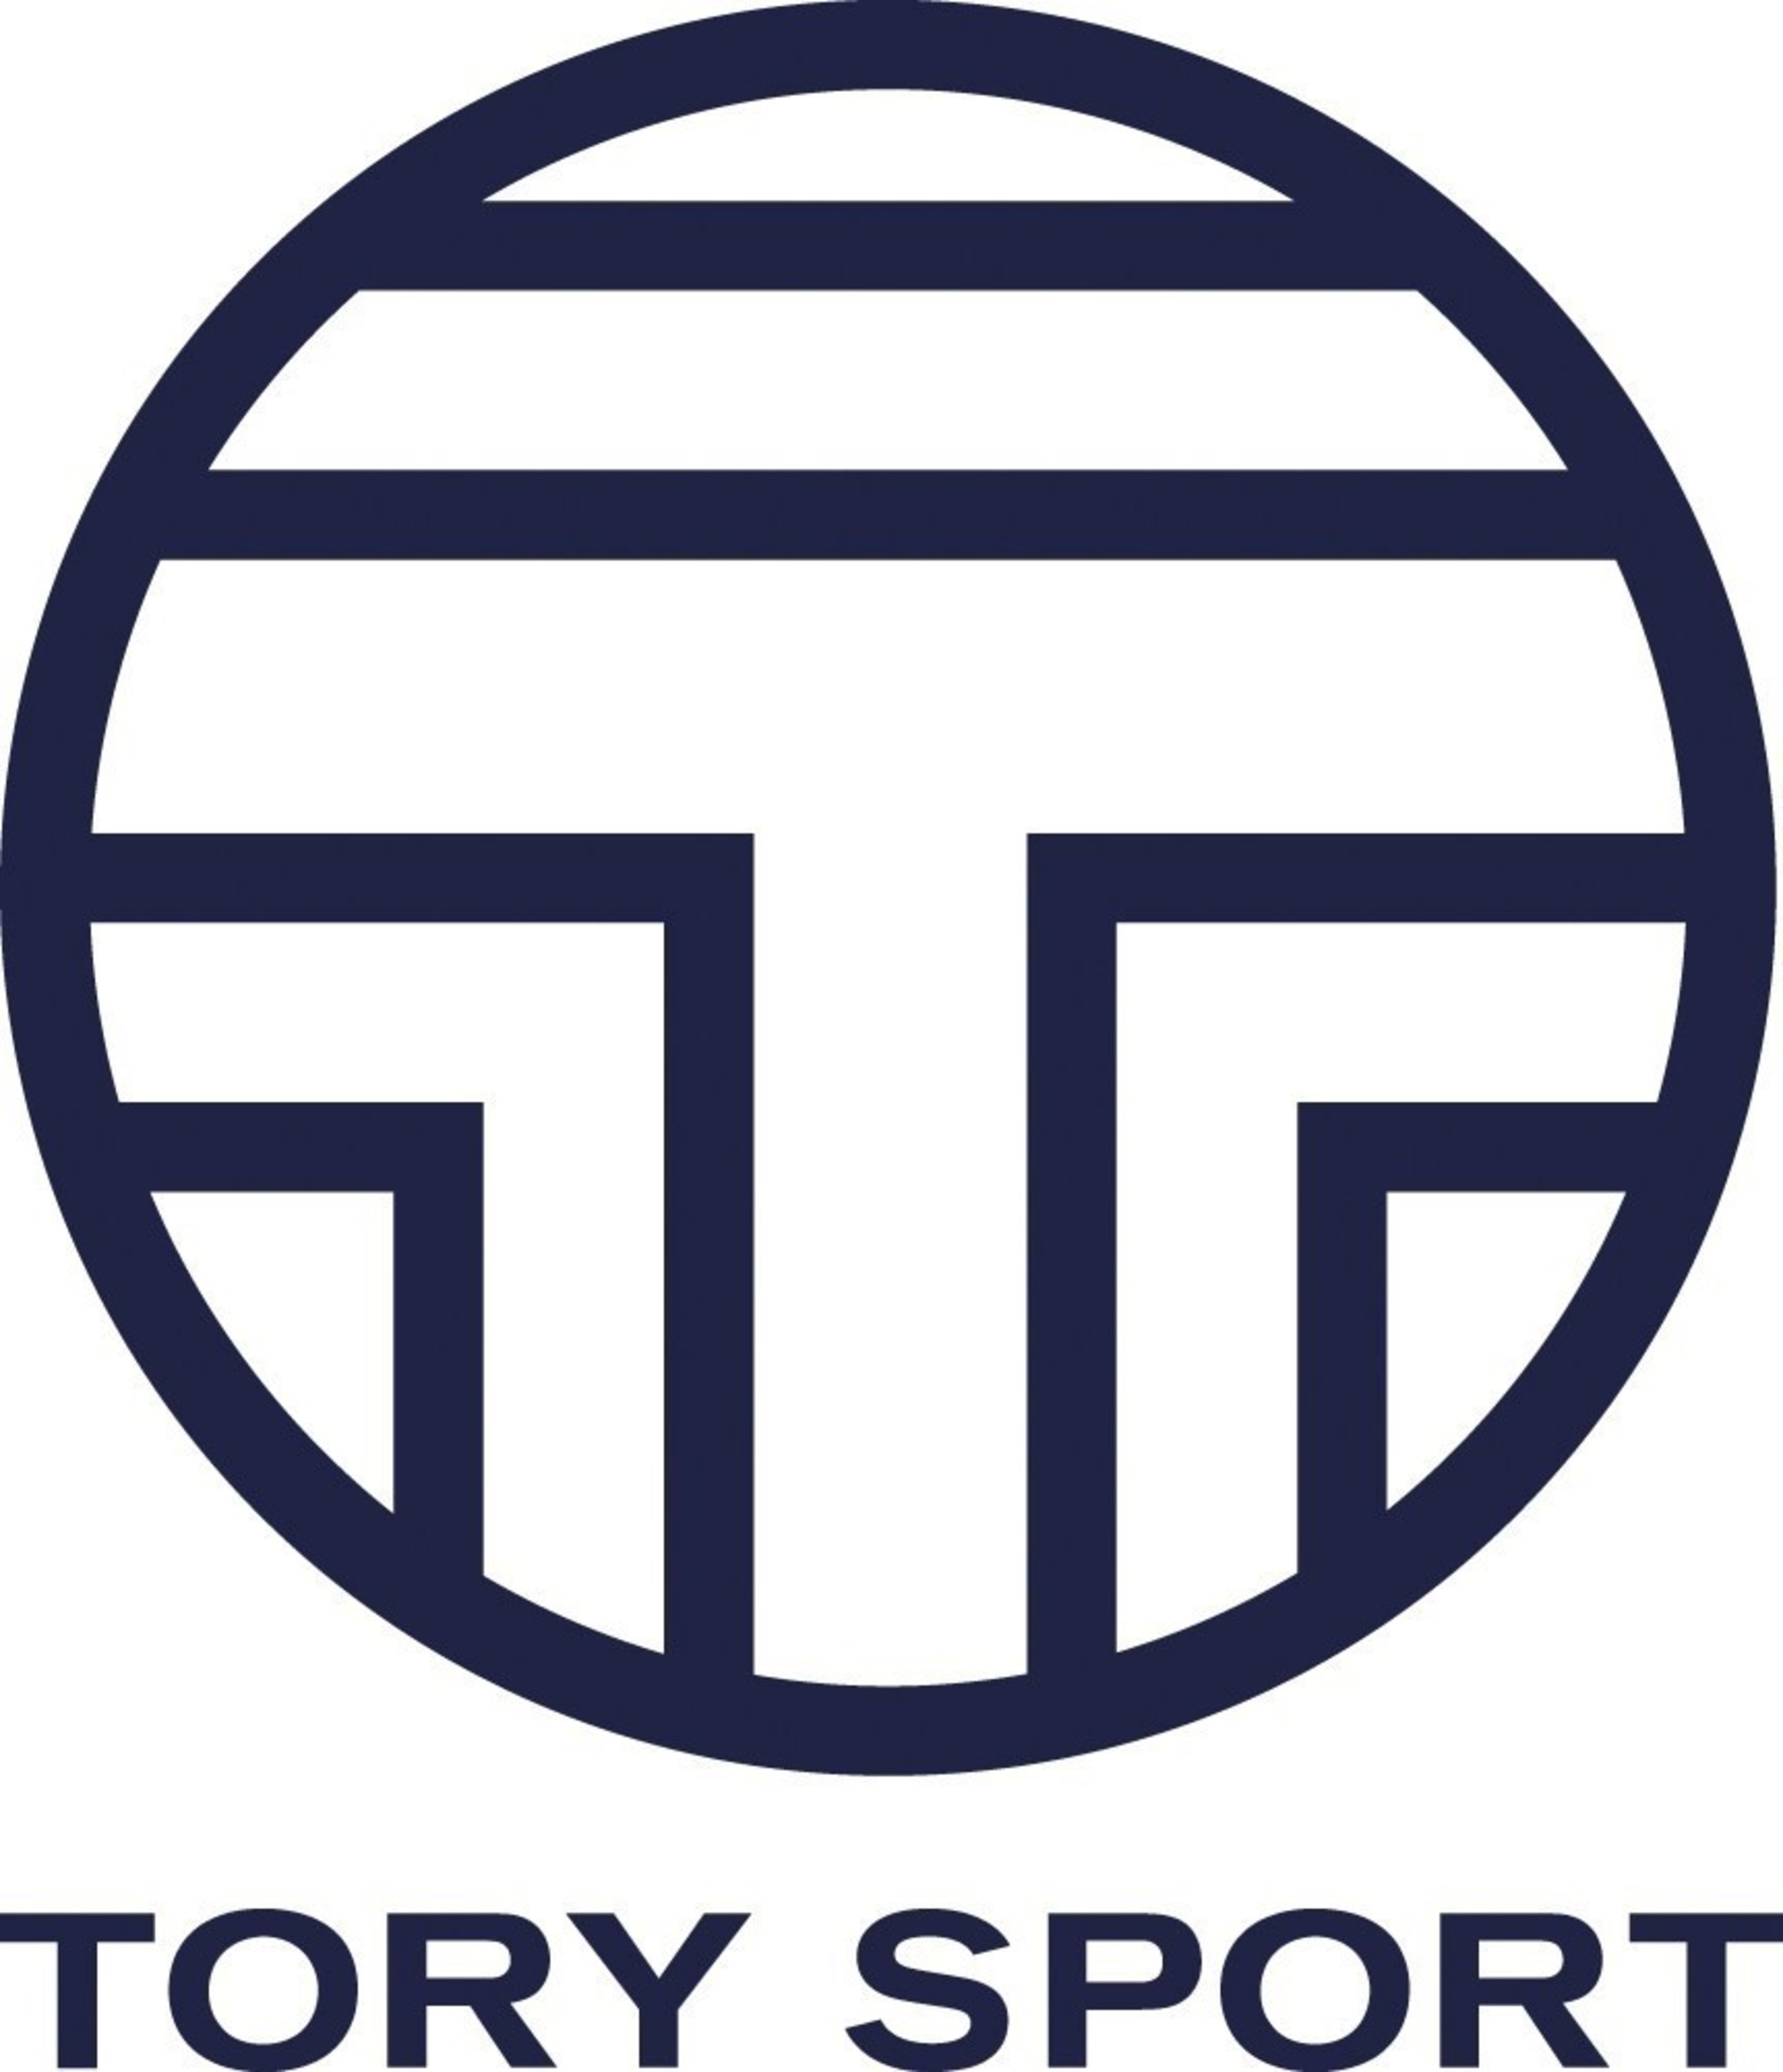 Tory Burch Introduces Tory Sport, a Performance Activewear Line